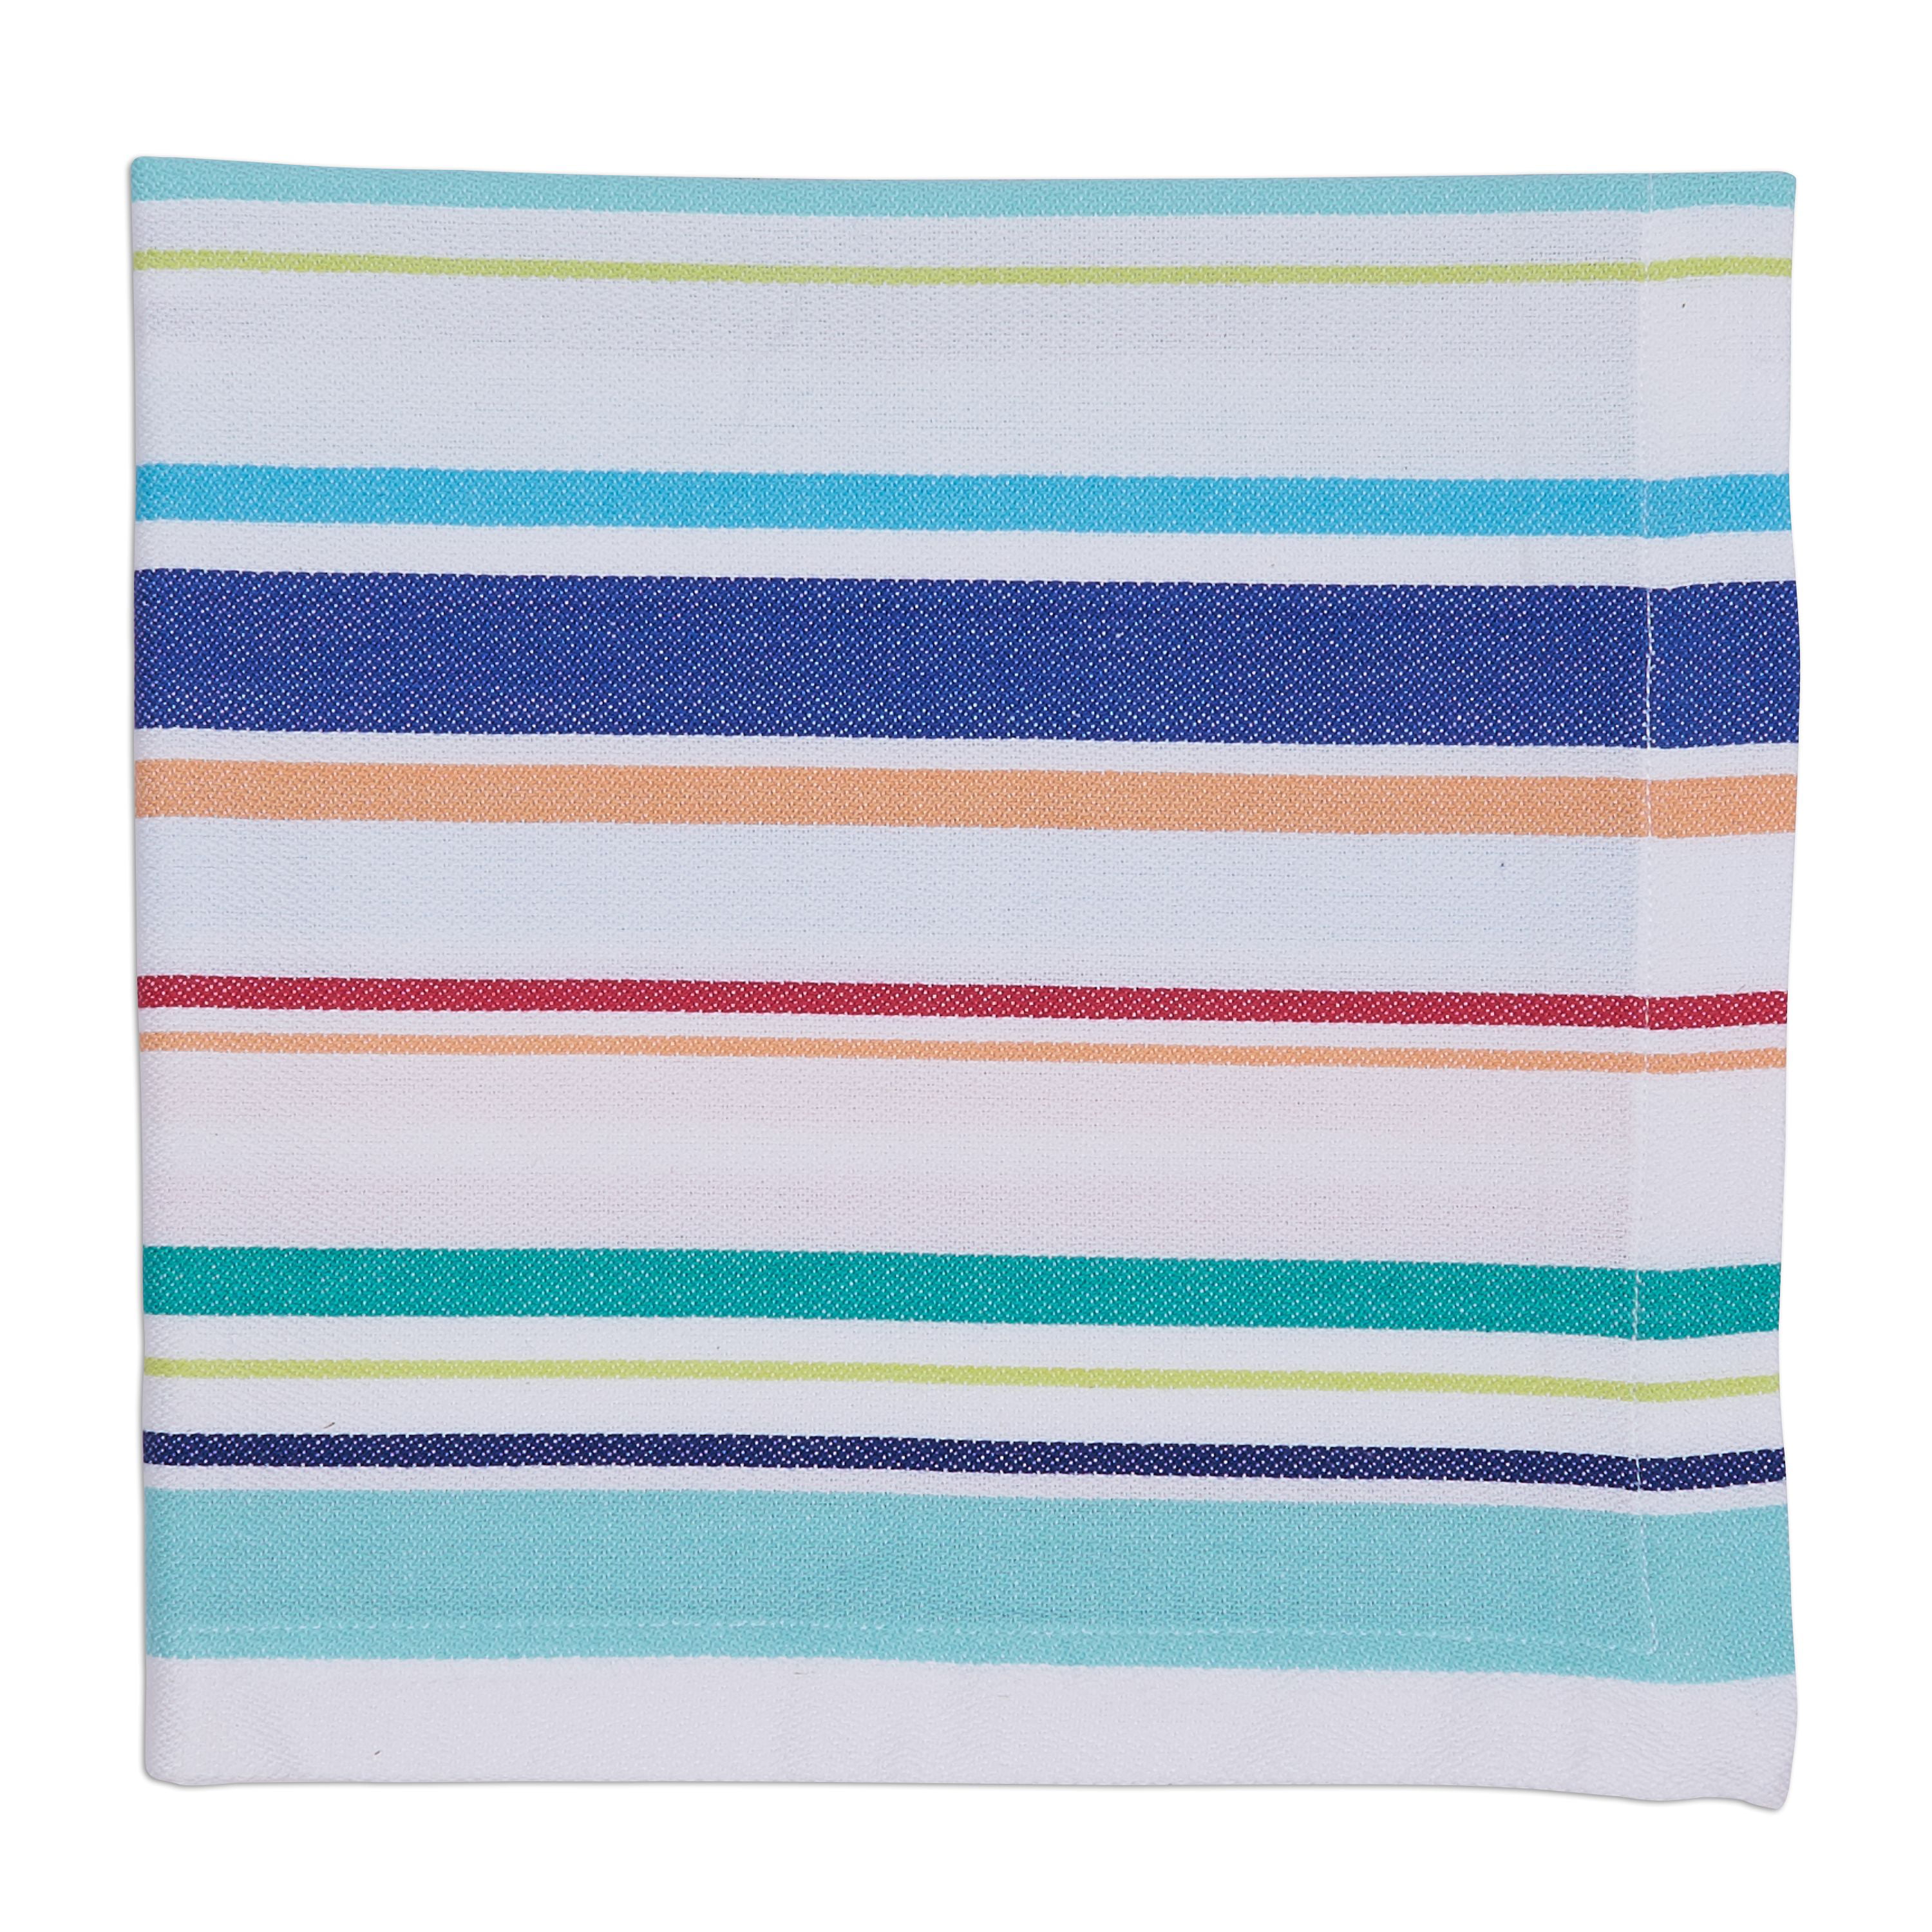 Free shipping USA only. 1.50 each Beach napkin Perfect for crafting Luncheon size